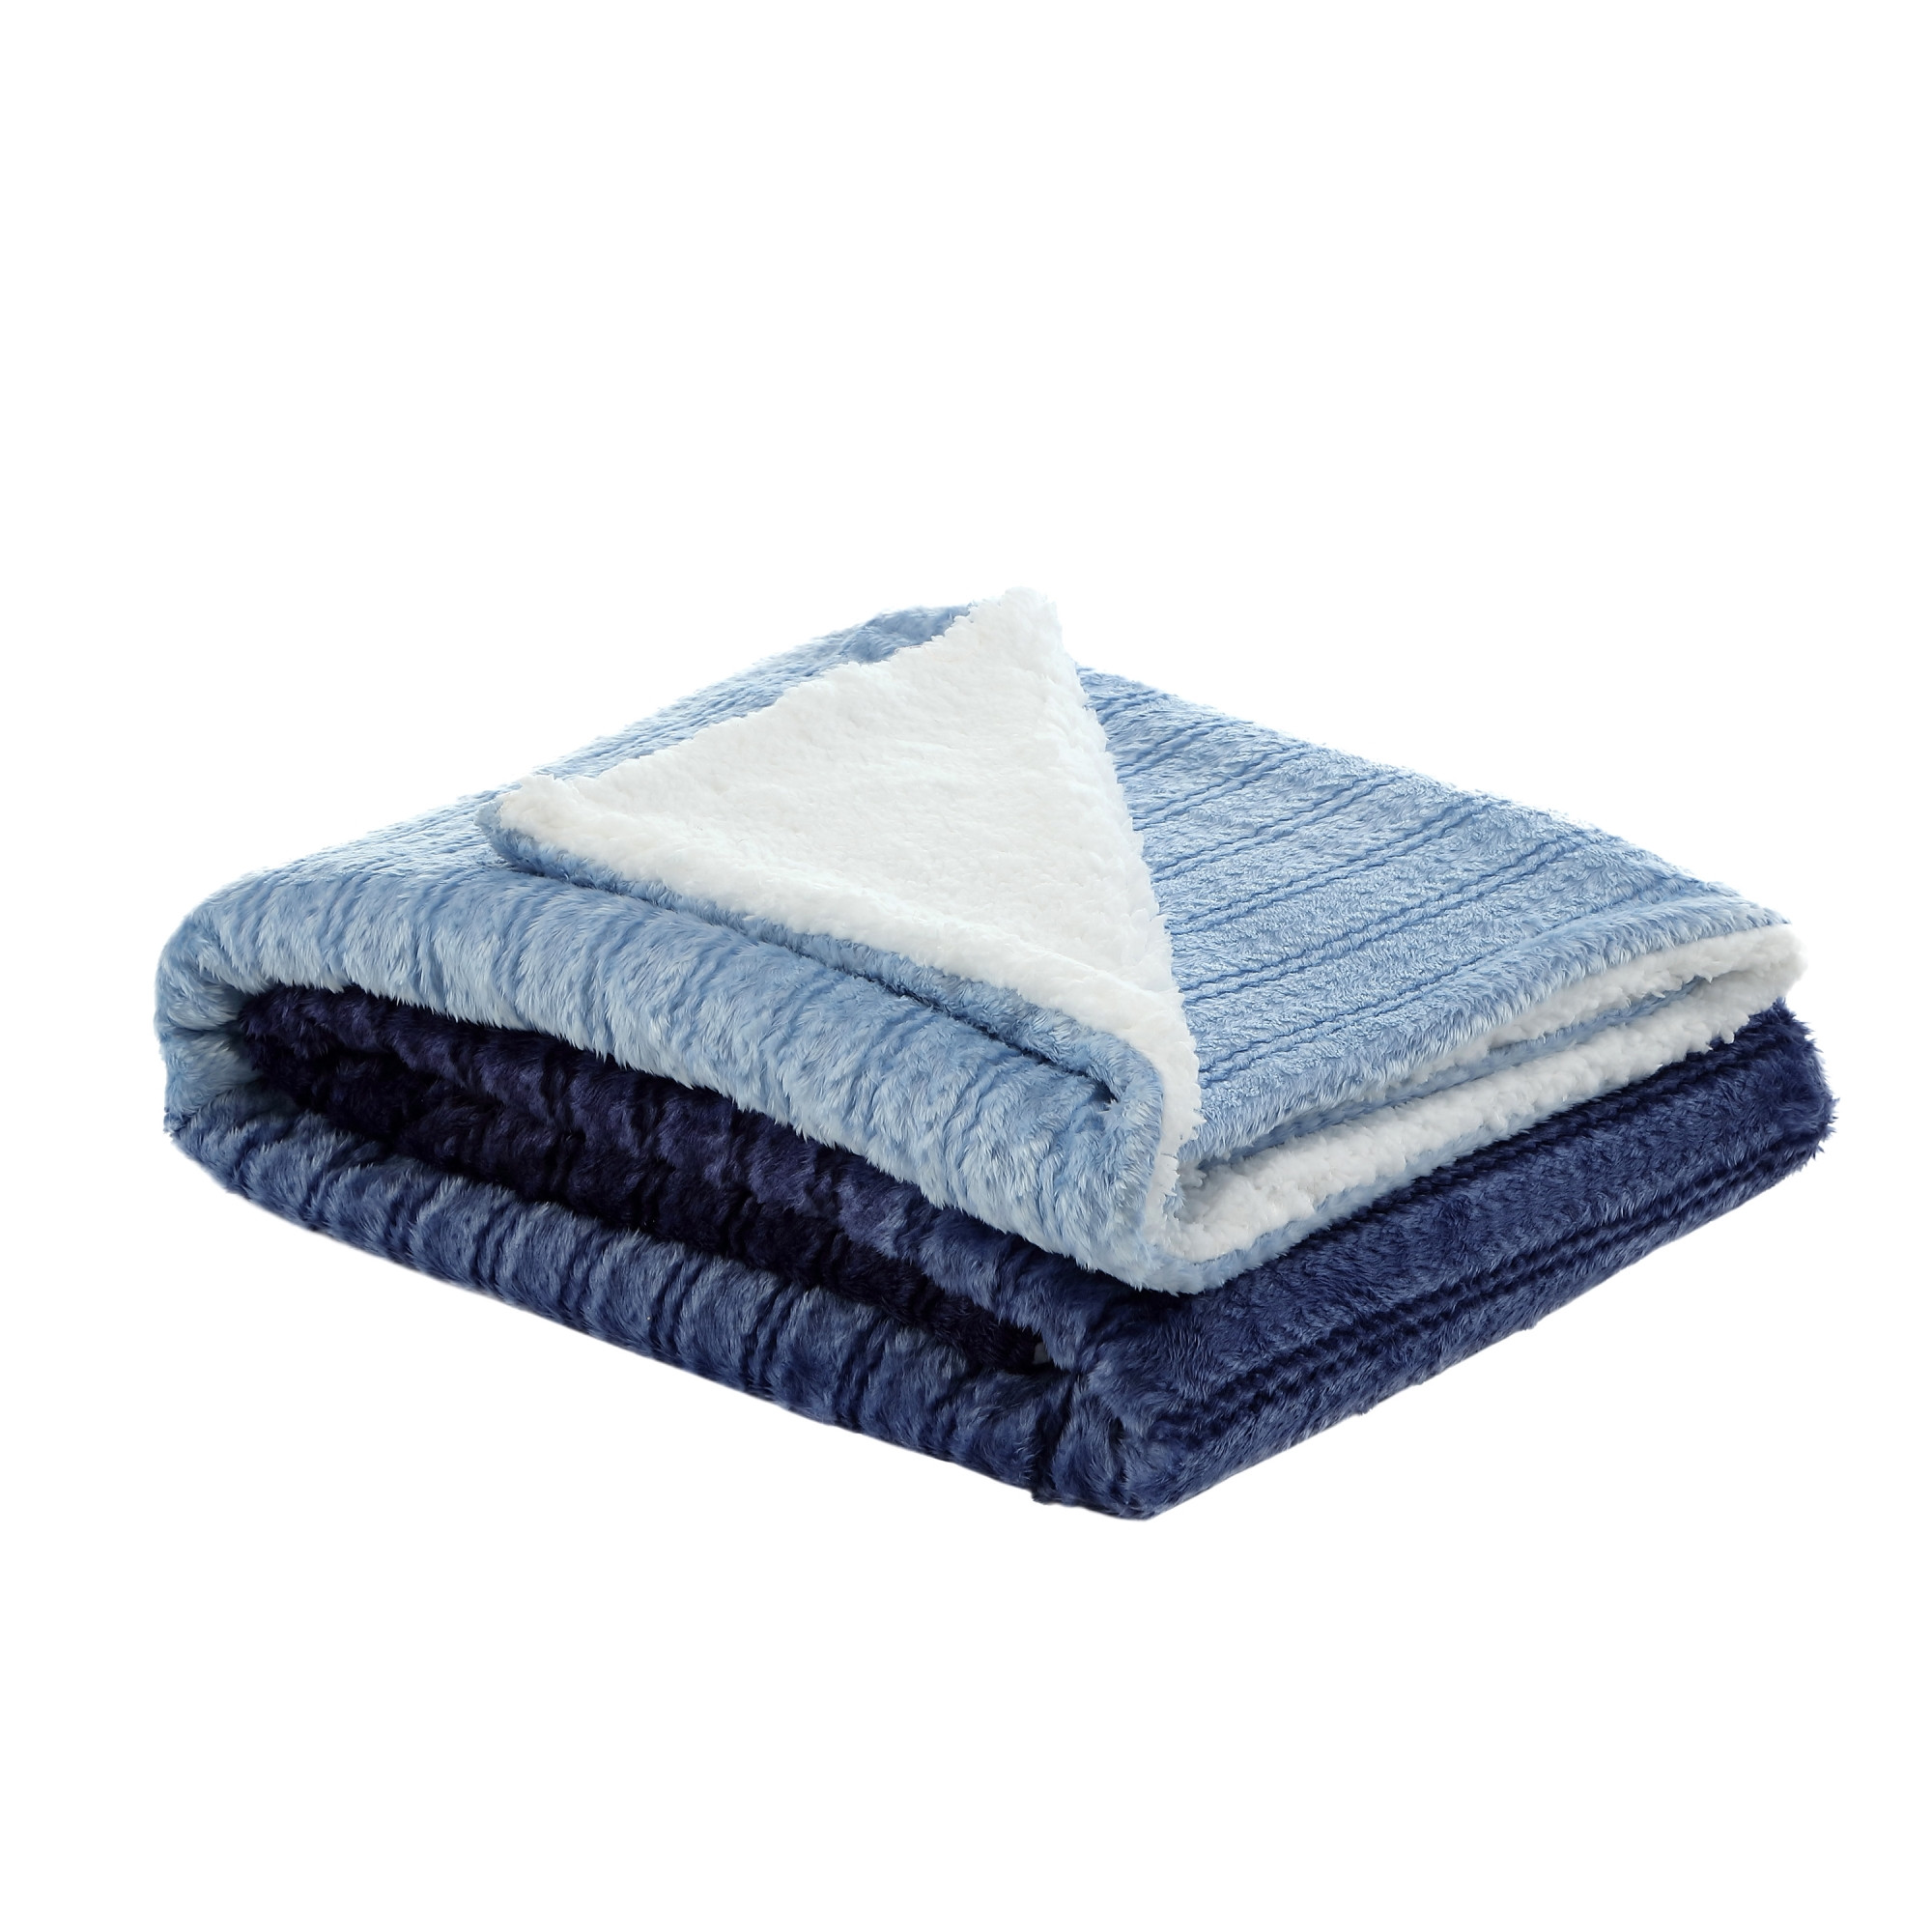 Navy Blue Knitted PolYester Solid Color Plush Throw Blanket-531230-1